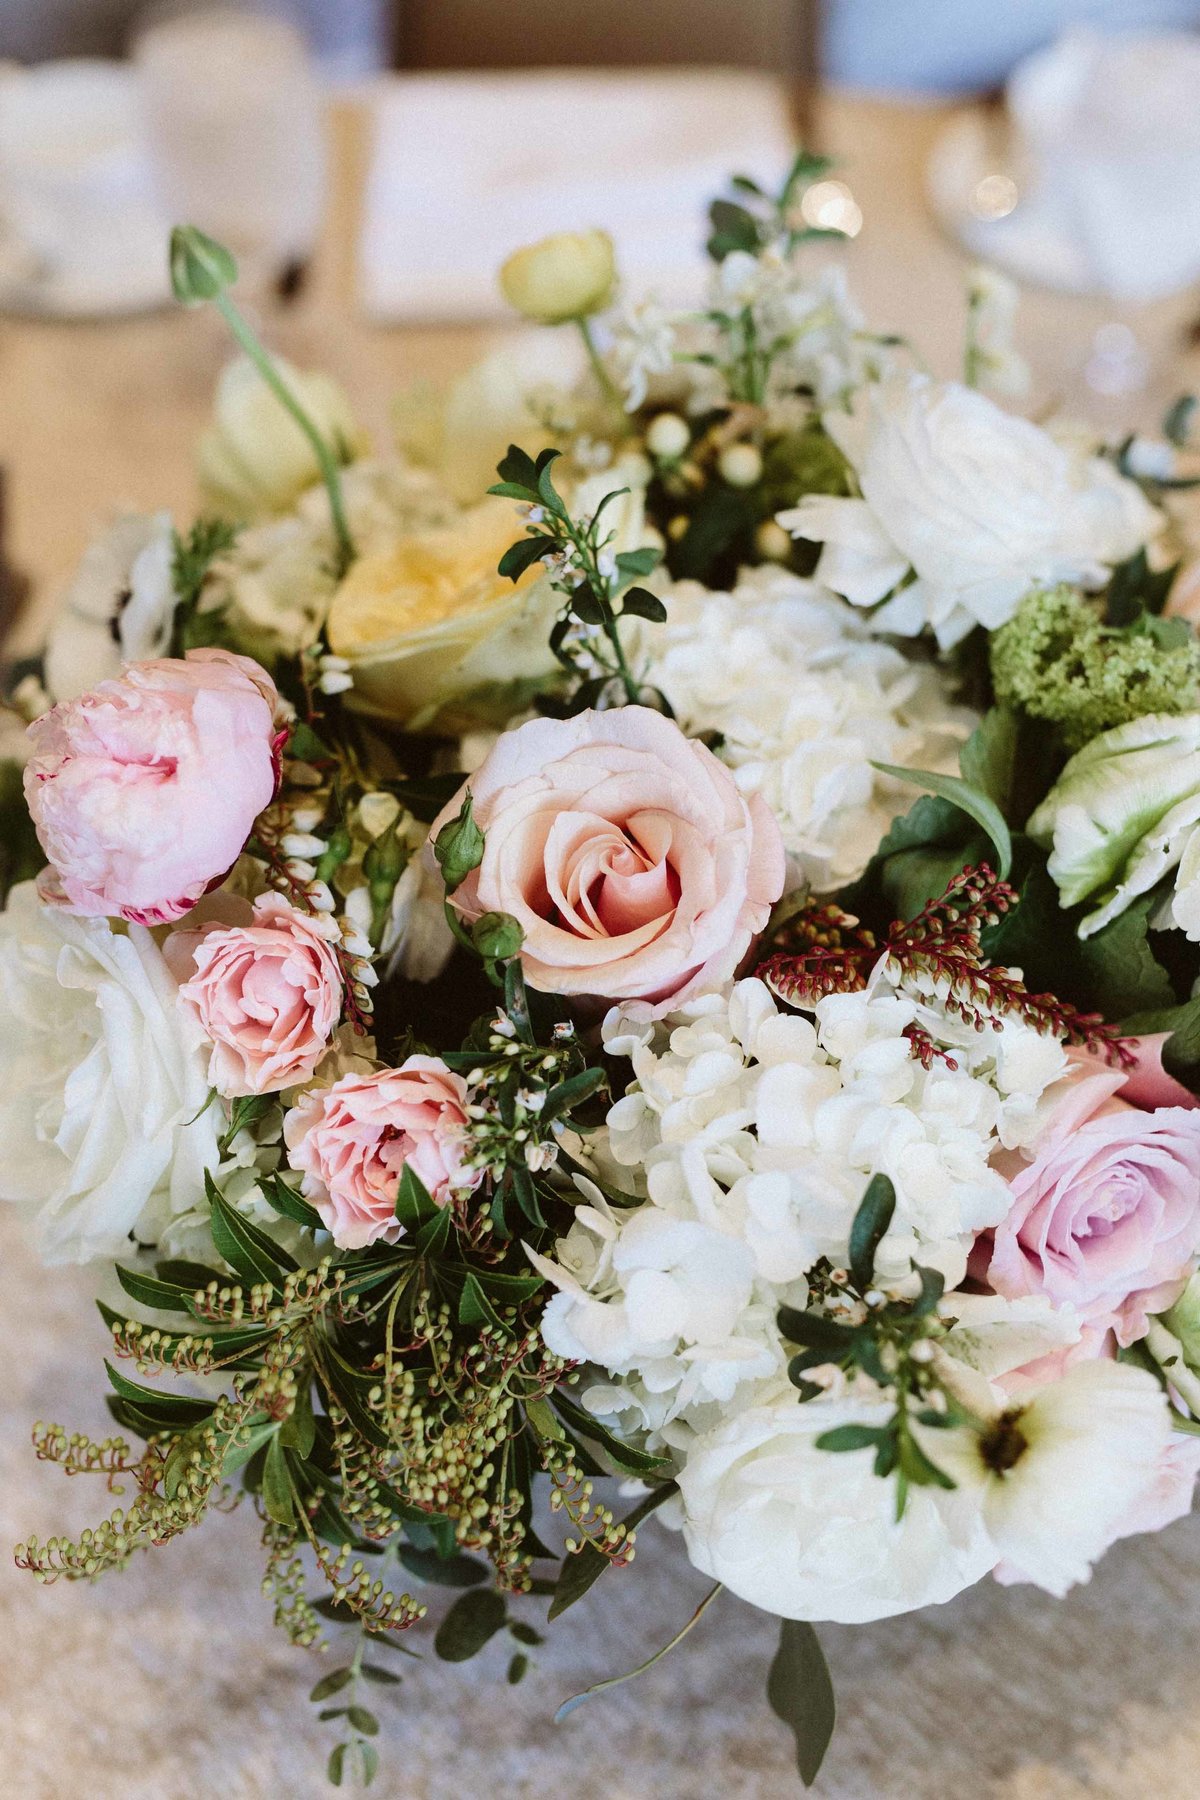 centerpiece detail with pink roses, spray roses, white hydrangea, spirea,, and anemones